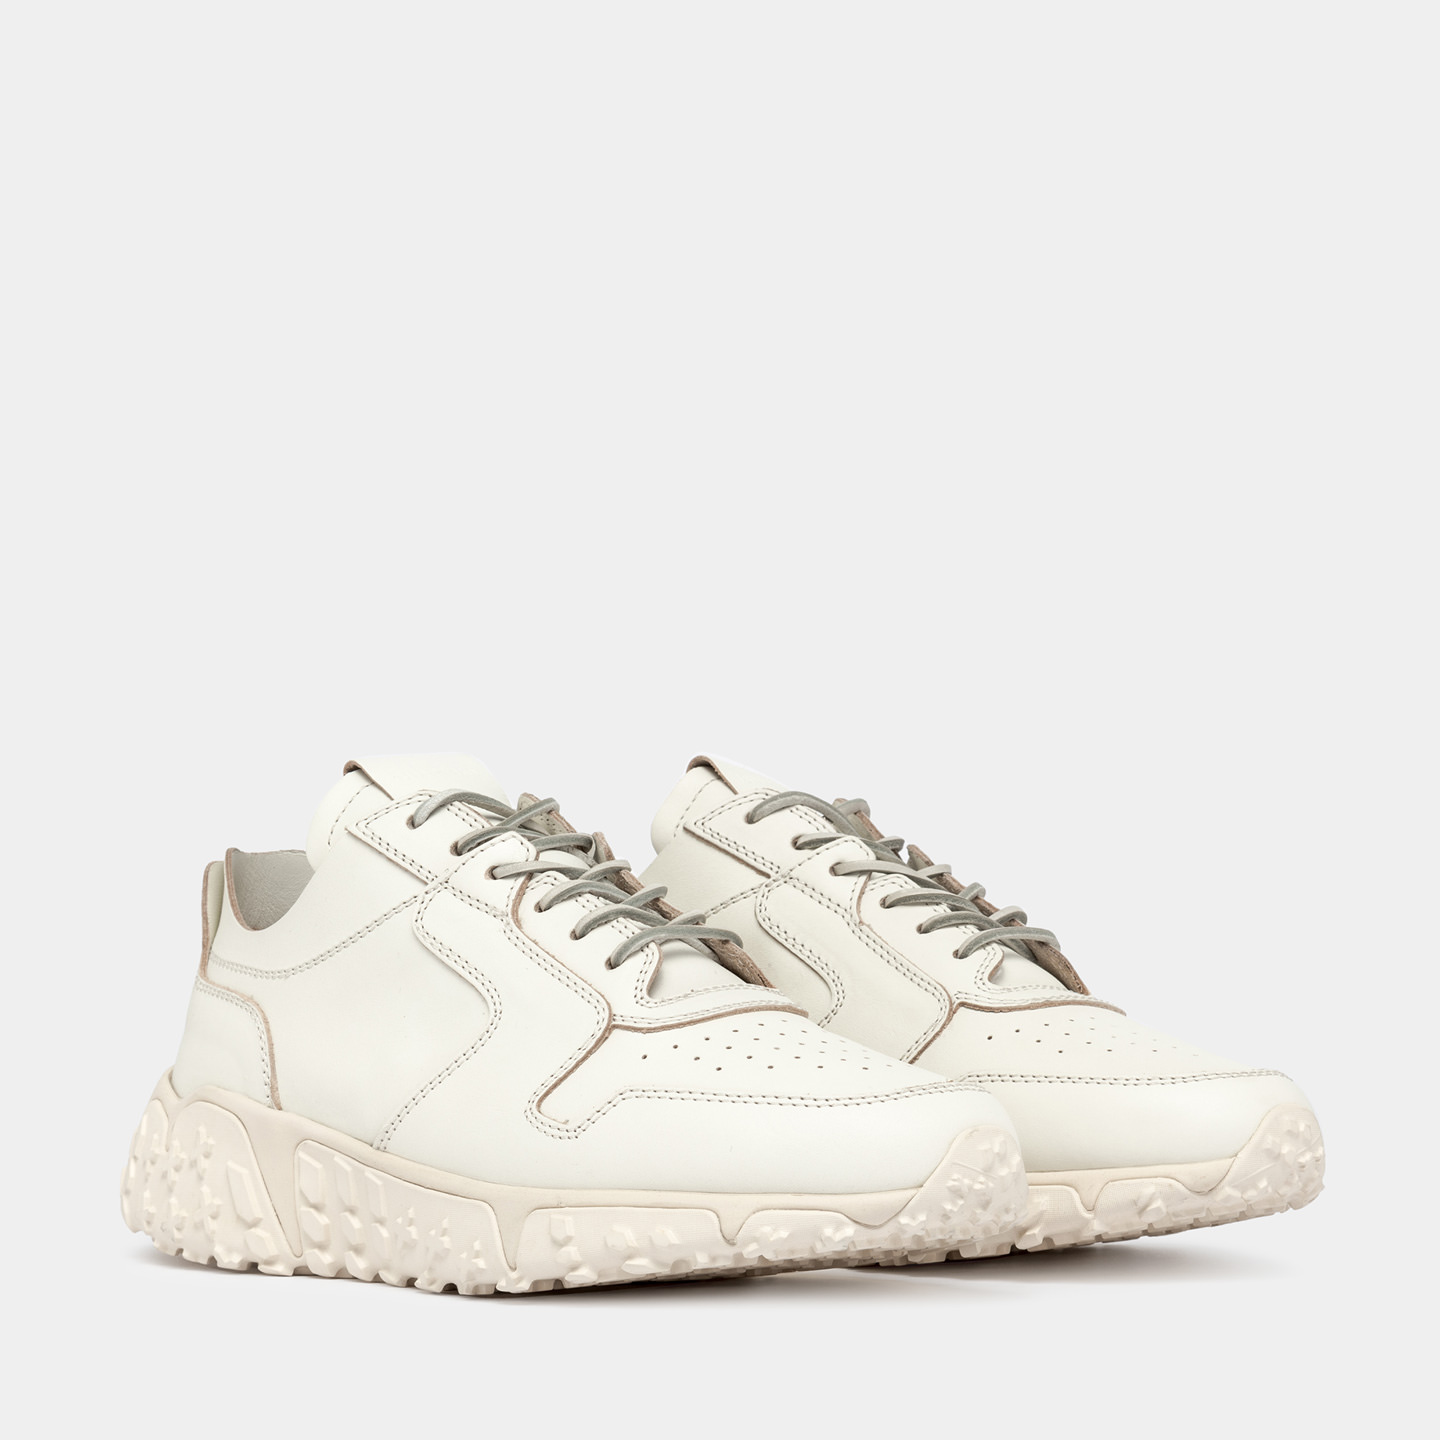 VINCI X SNEAKERS IN WHITE LEATHER